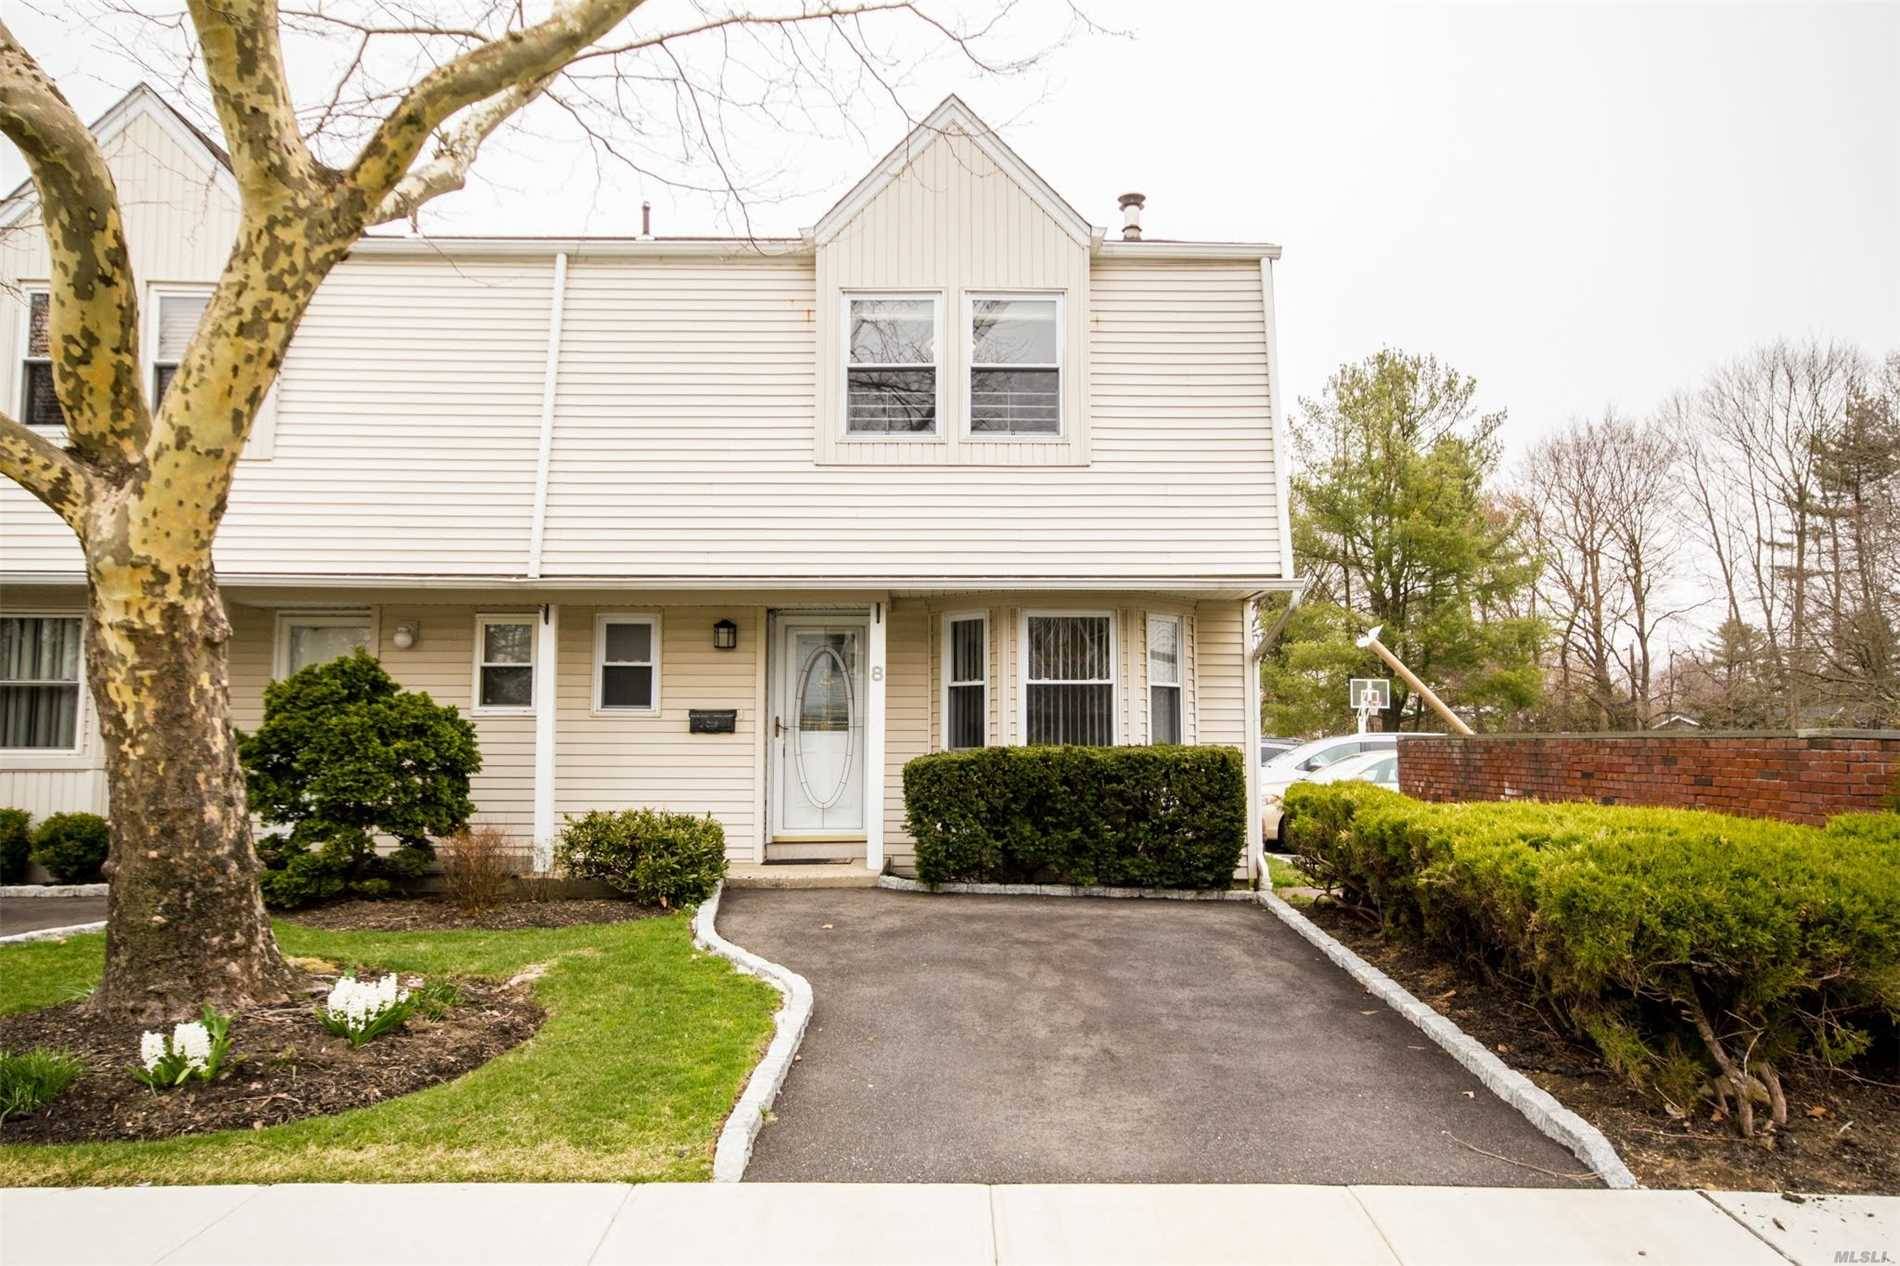 Beautiful end unit featuring 3 bedrooms 3 full baths, renovated eat in kitchenan bathrooms, granite ss appliances, new carpets, hardwood floors, cac, finished basement with laundry room.